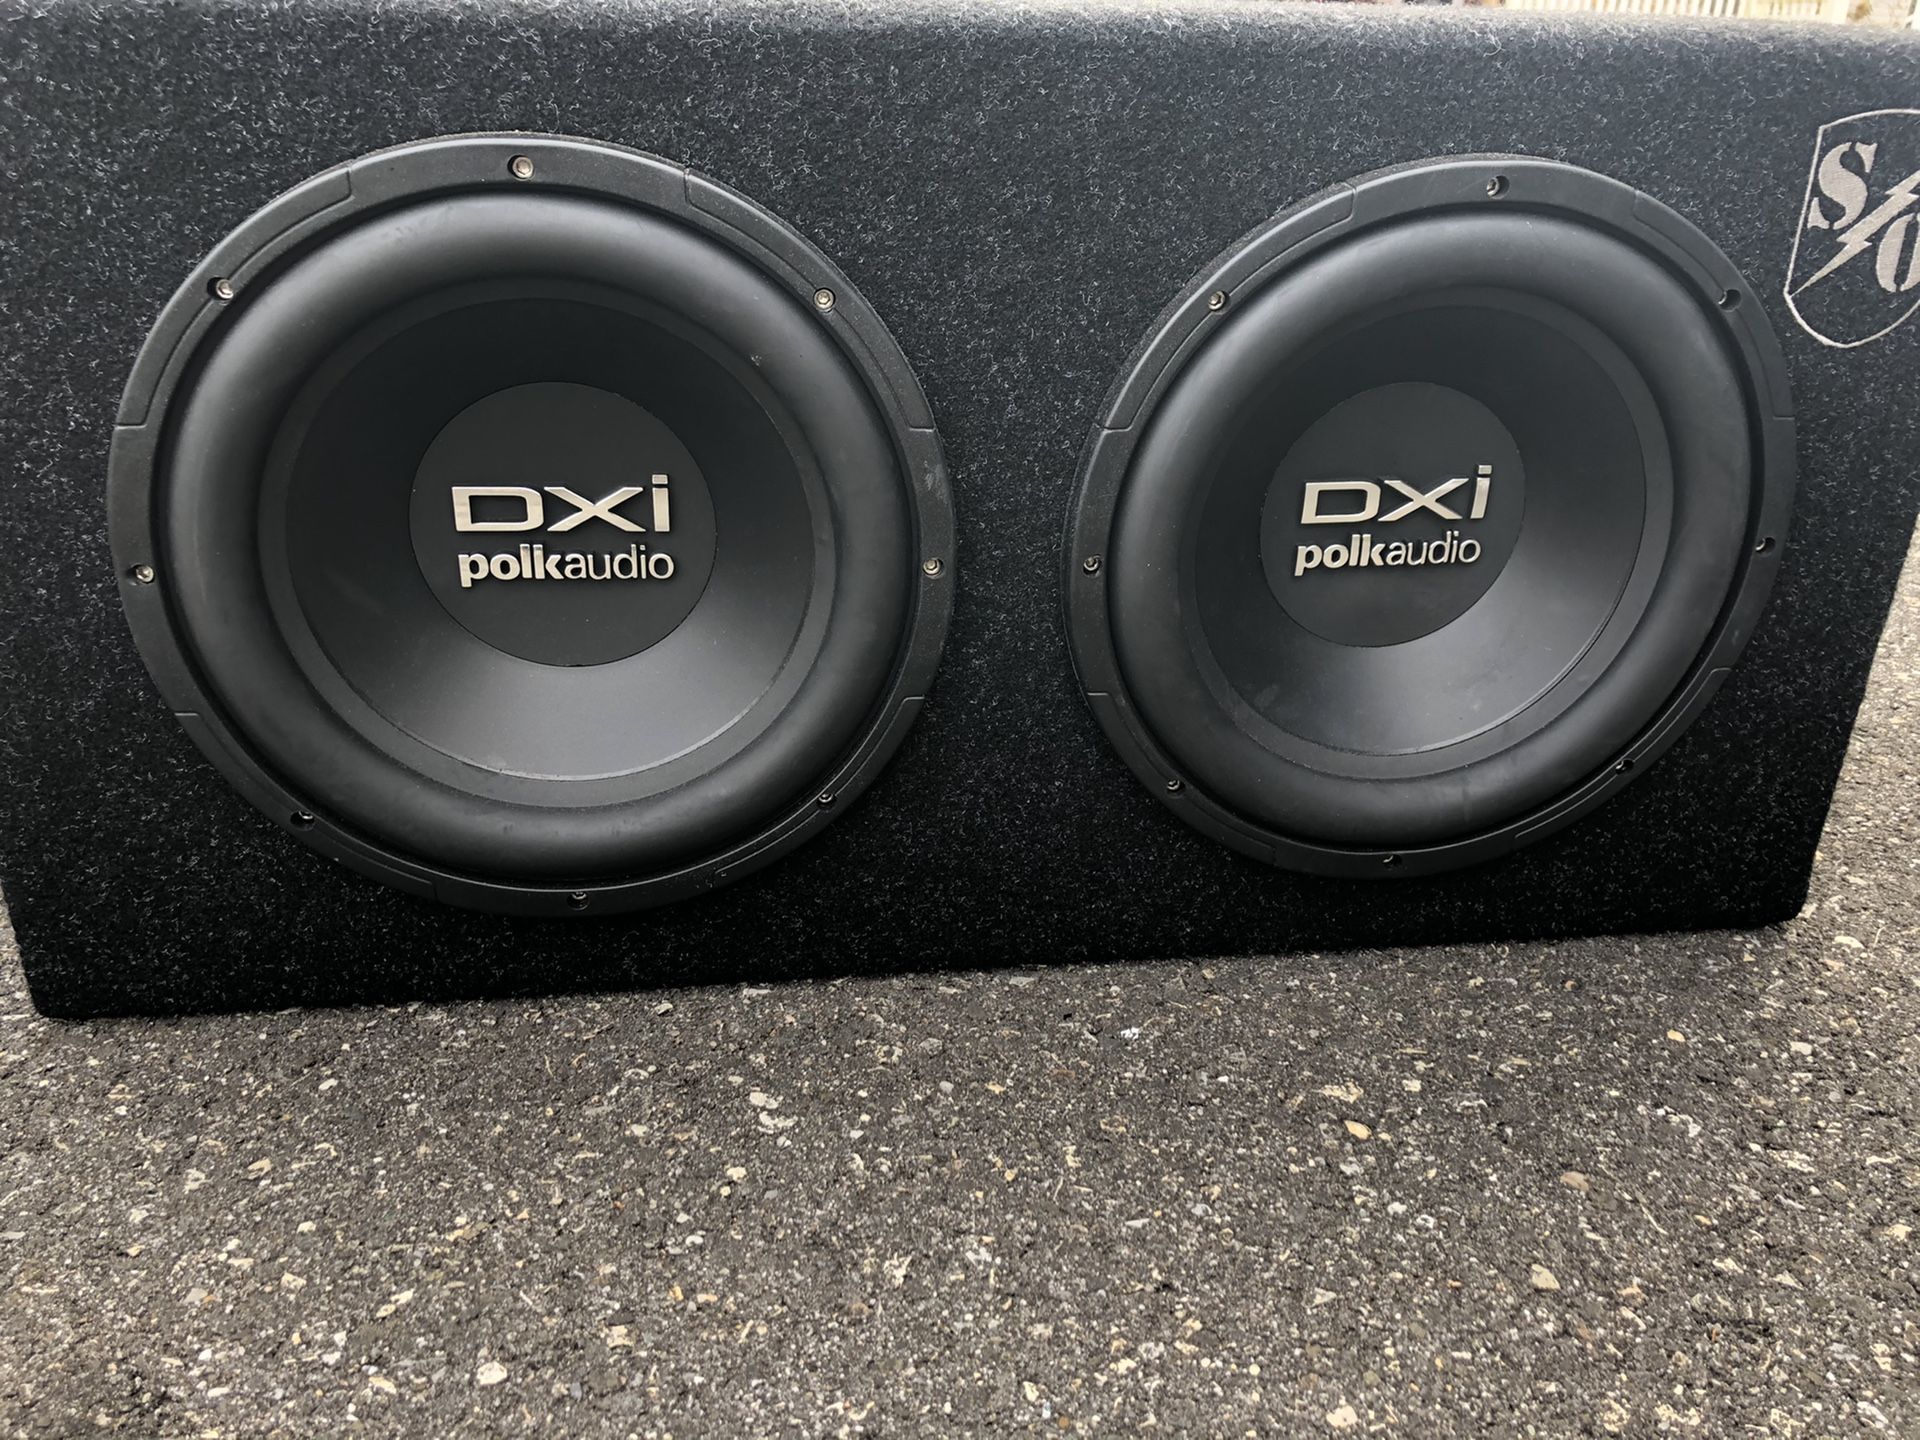 DXi Polkaudio subwoofer with amp